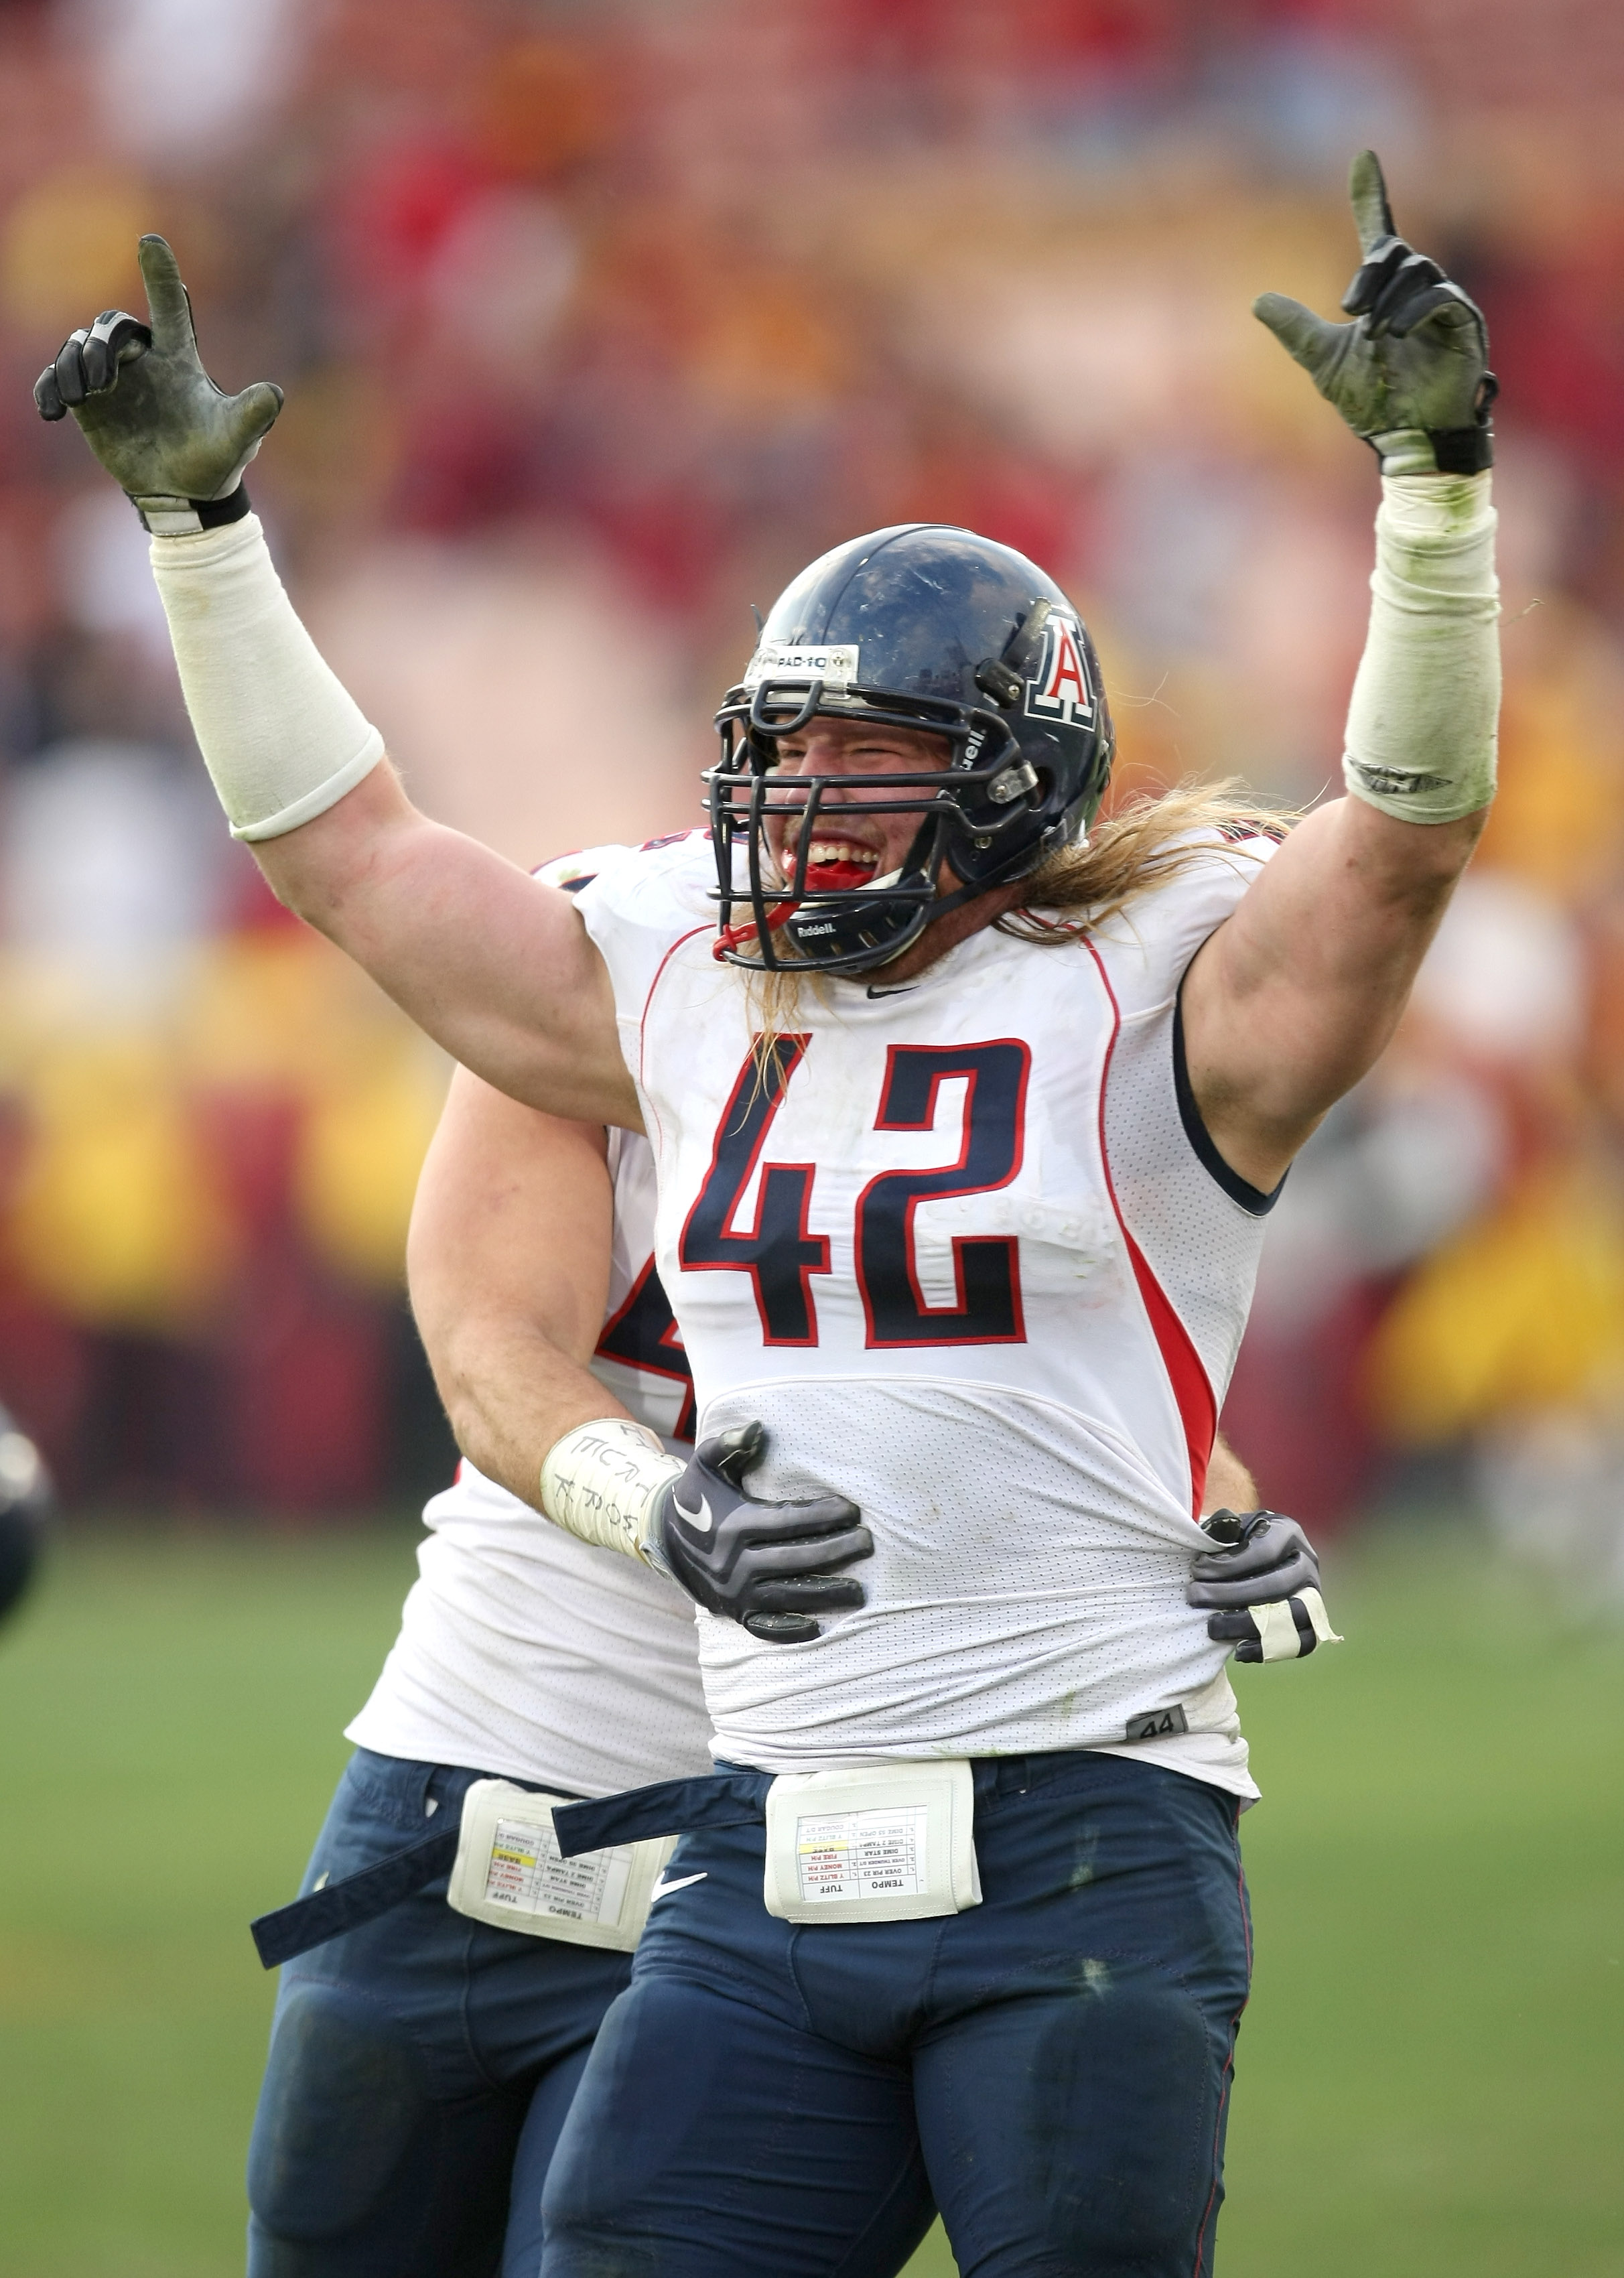 LOS ANGELES, CA - DECEMBER 05:  Defensive end Brooks Reed #42 of the Arizona Wildcats celebrates after stopping the USC Trojans on the final play on December 5, 2009 at the Los Angeles Coliseum in Los Angeles, California. Arizona won 21-17.  (Photo by Ste